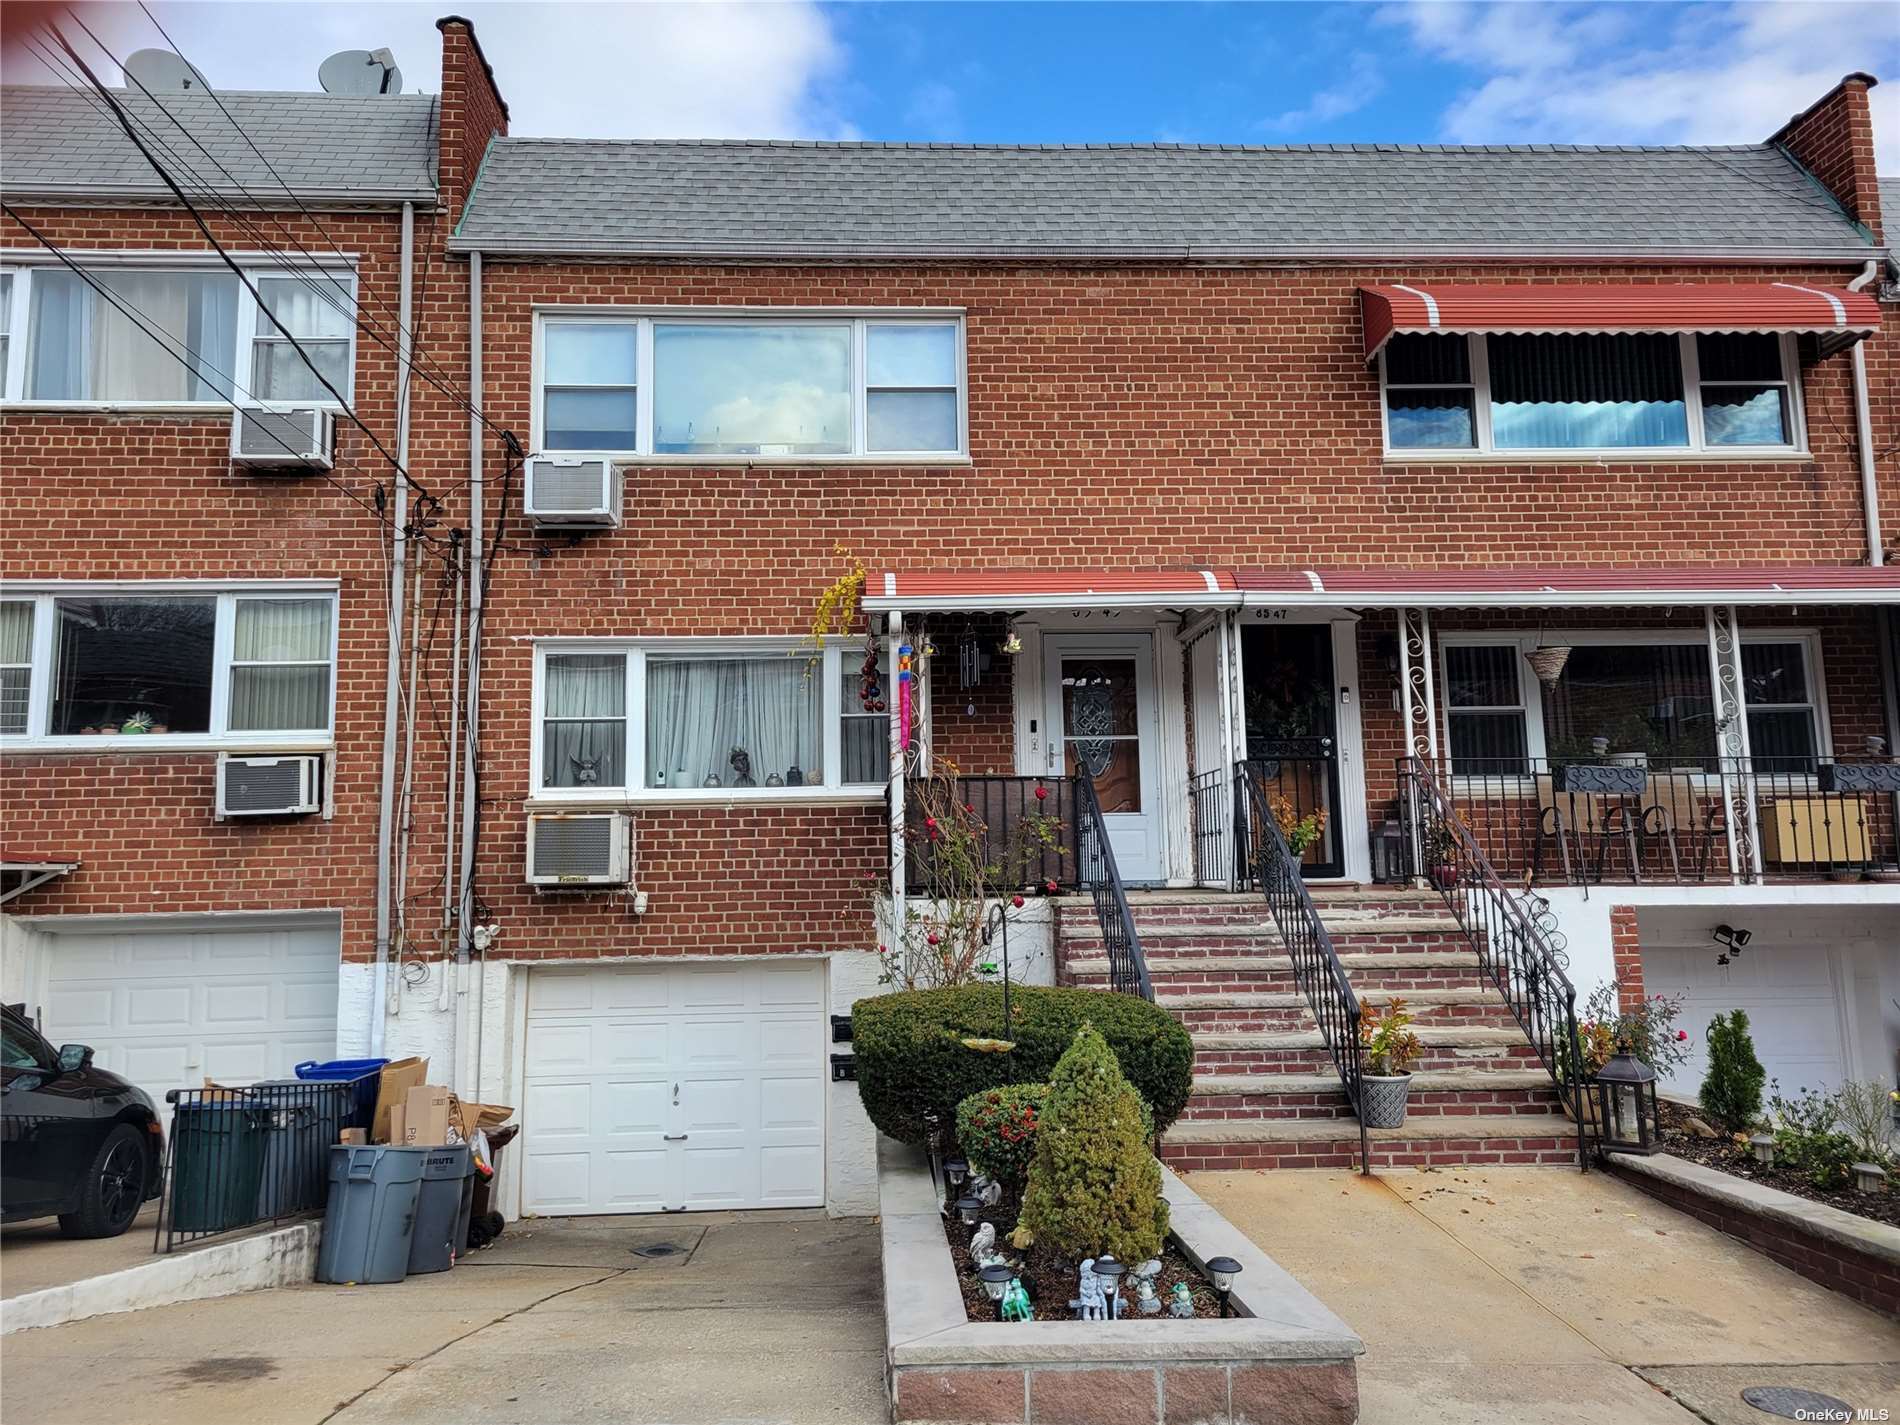 Two Family in Woodhaven - 75  Queens, NY 11421